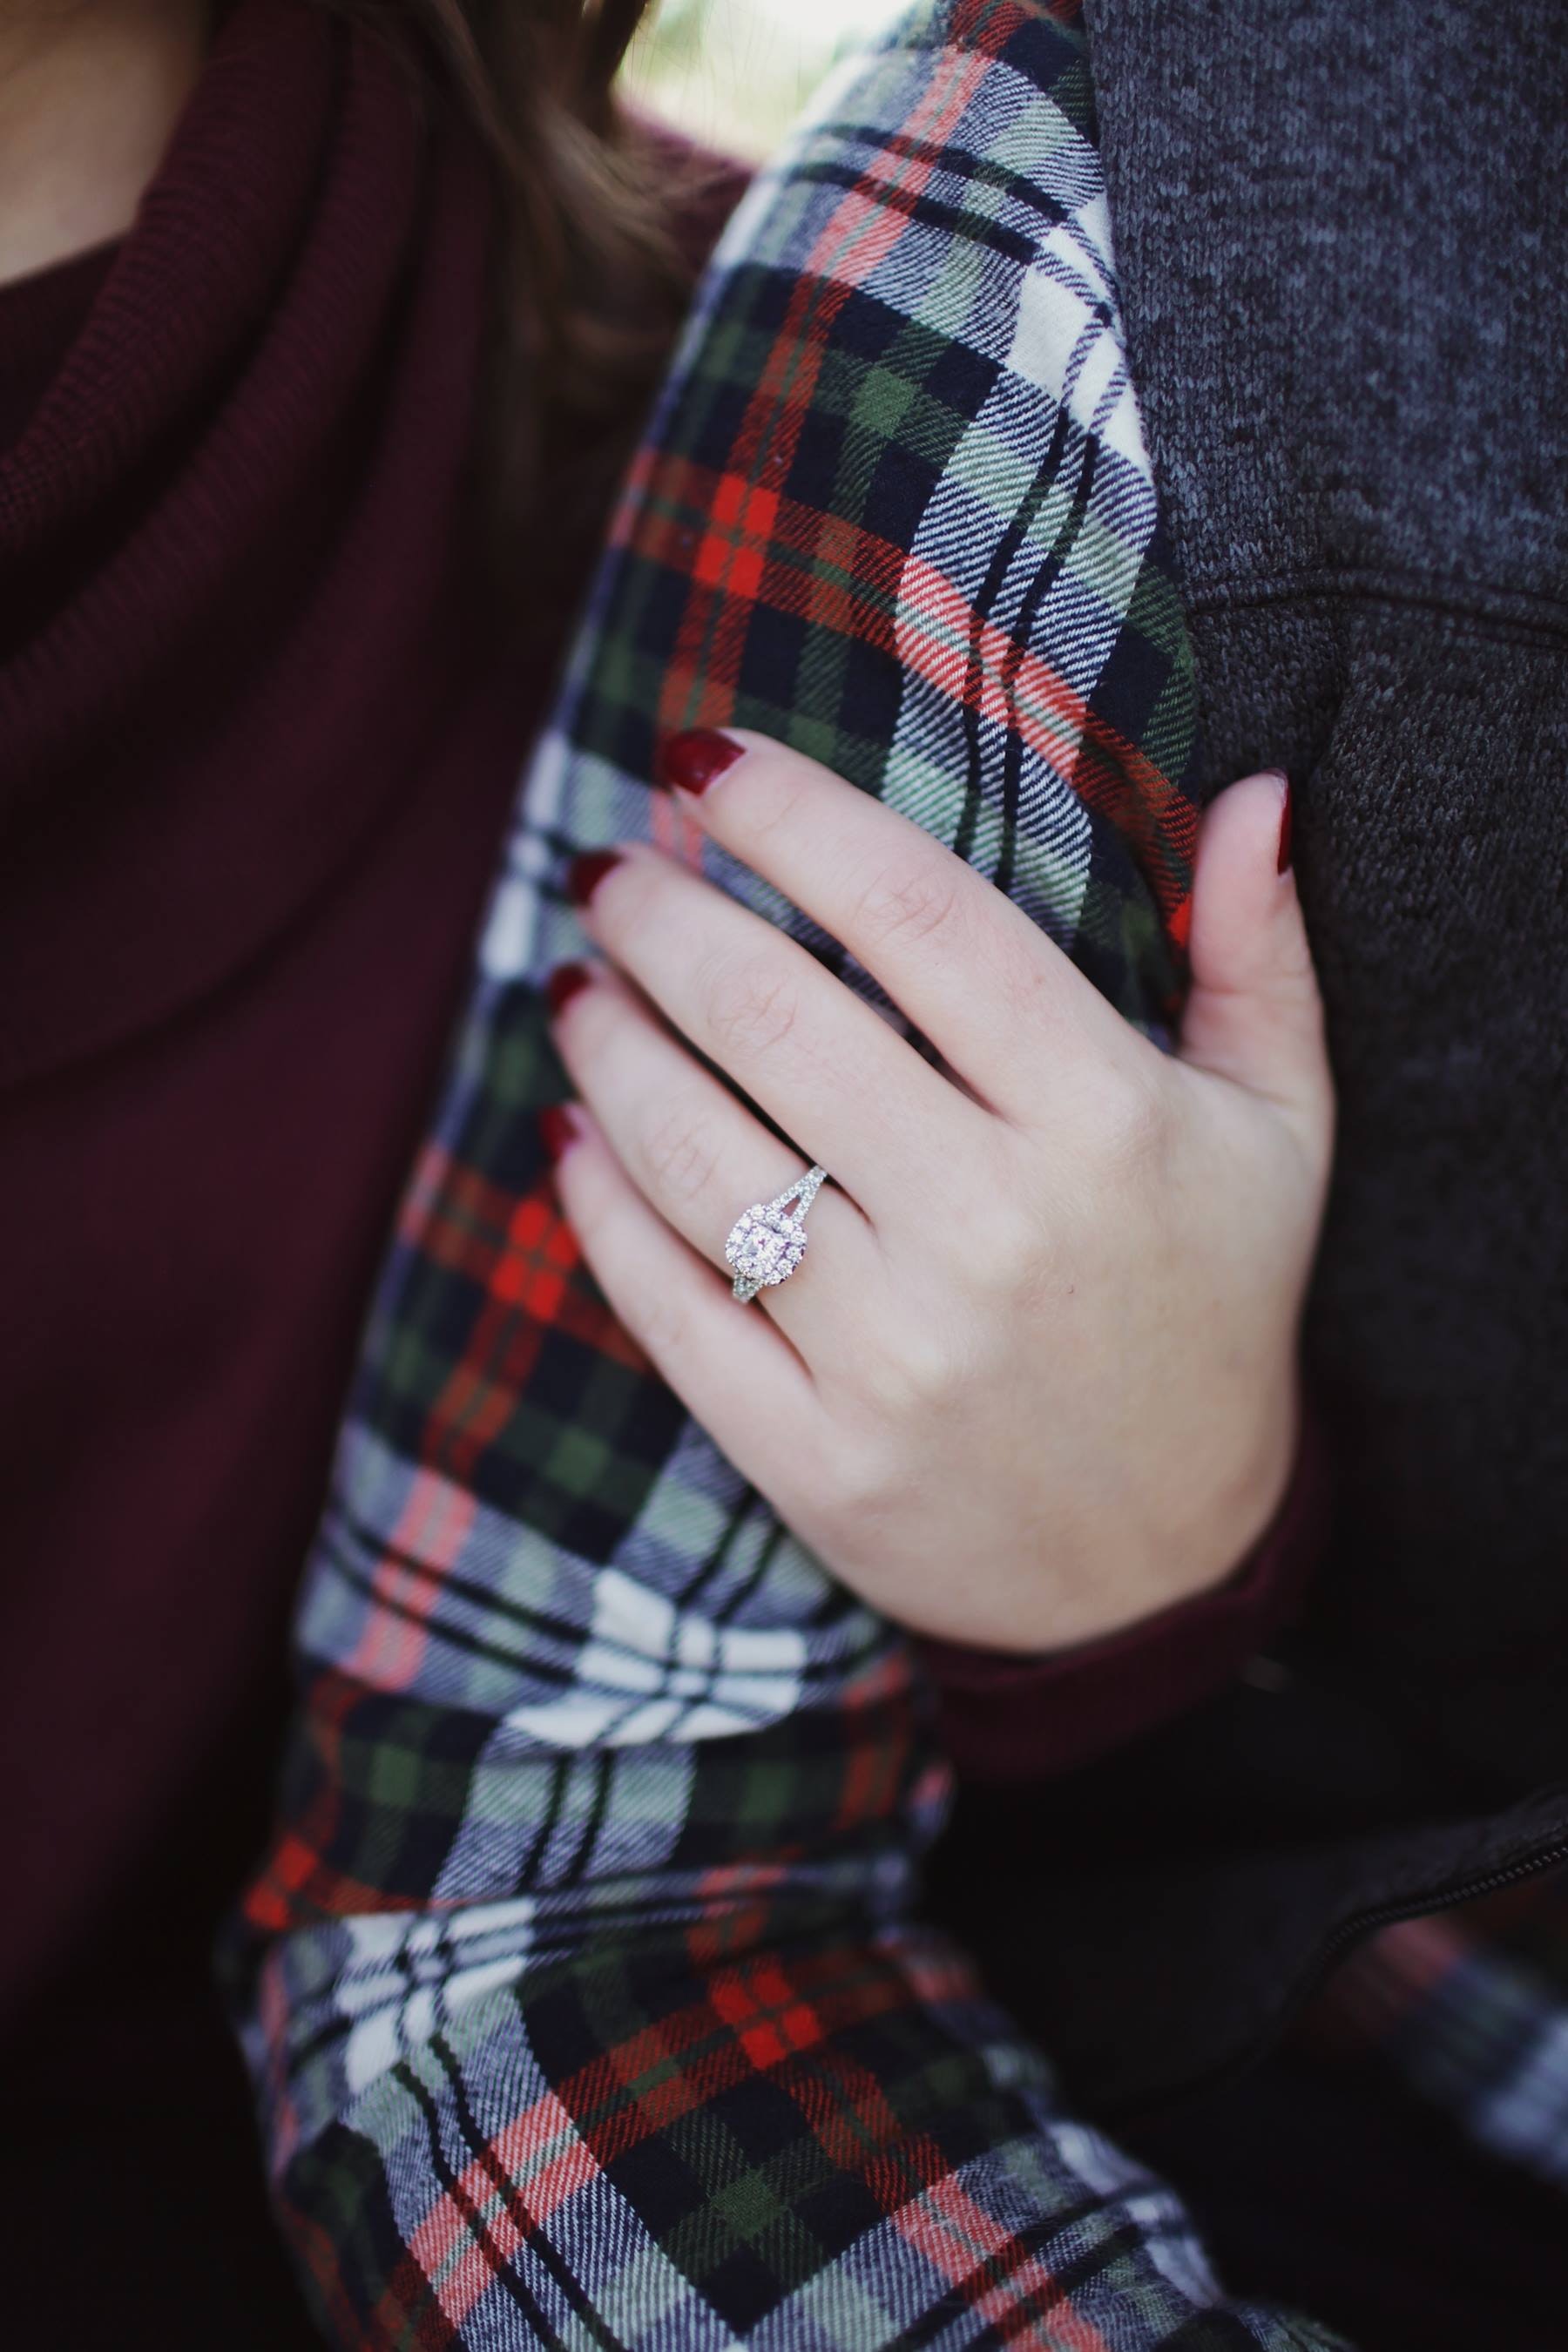 Woman wearing silver-colored solitaire ring holding person's arm photo